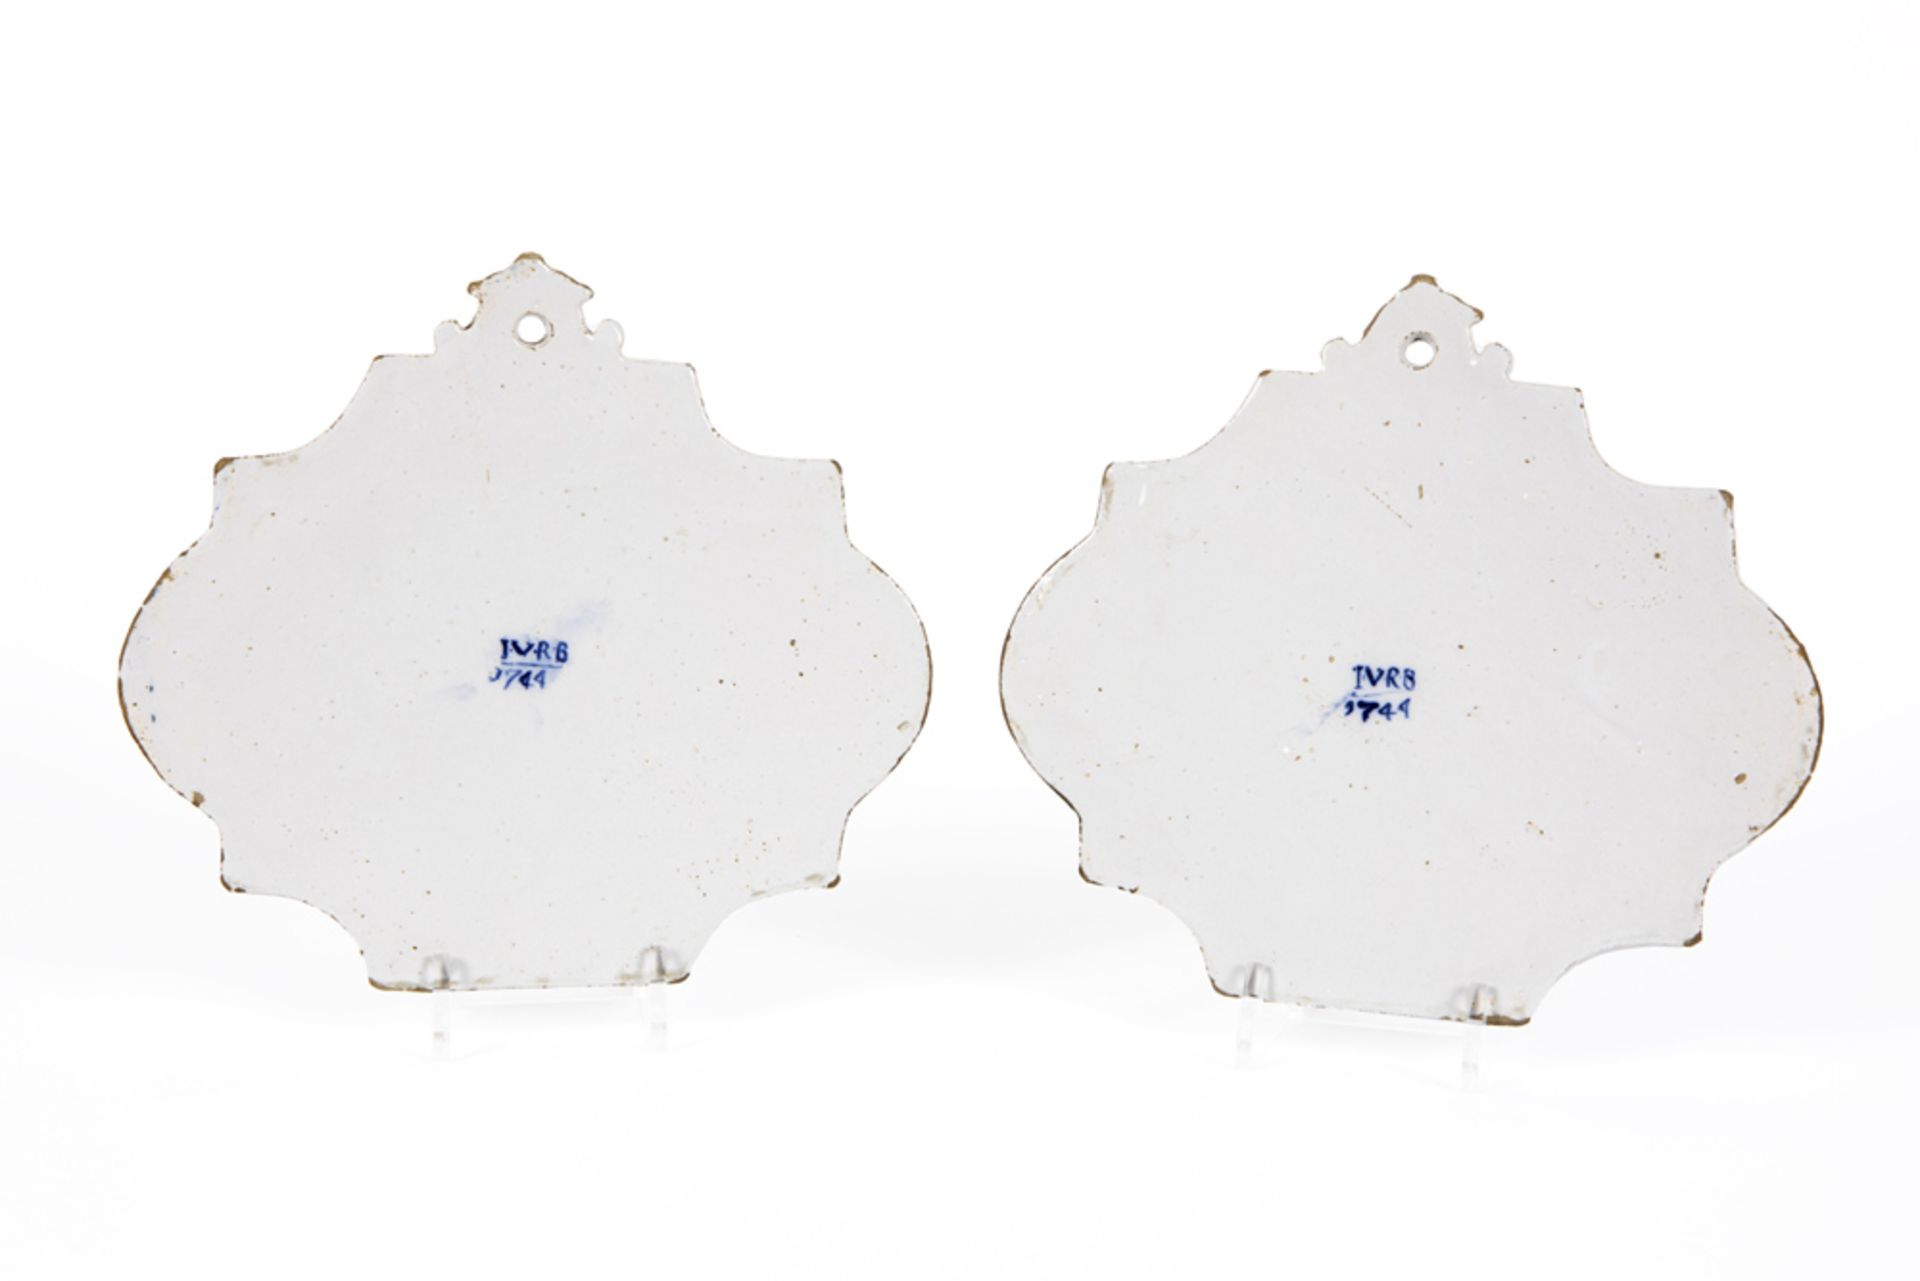 pair of presumably 18th Cent plaques in ceramic from Delft, marked IVRN 1744, with a baroque style - Image 2 of 3